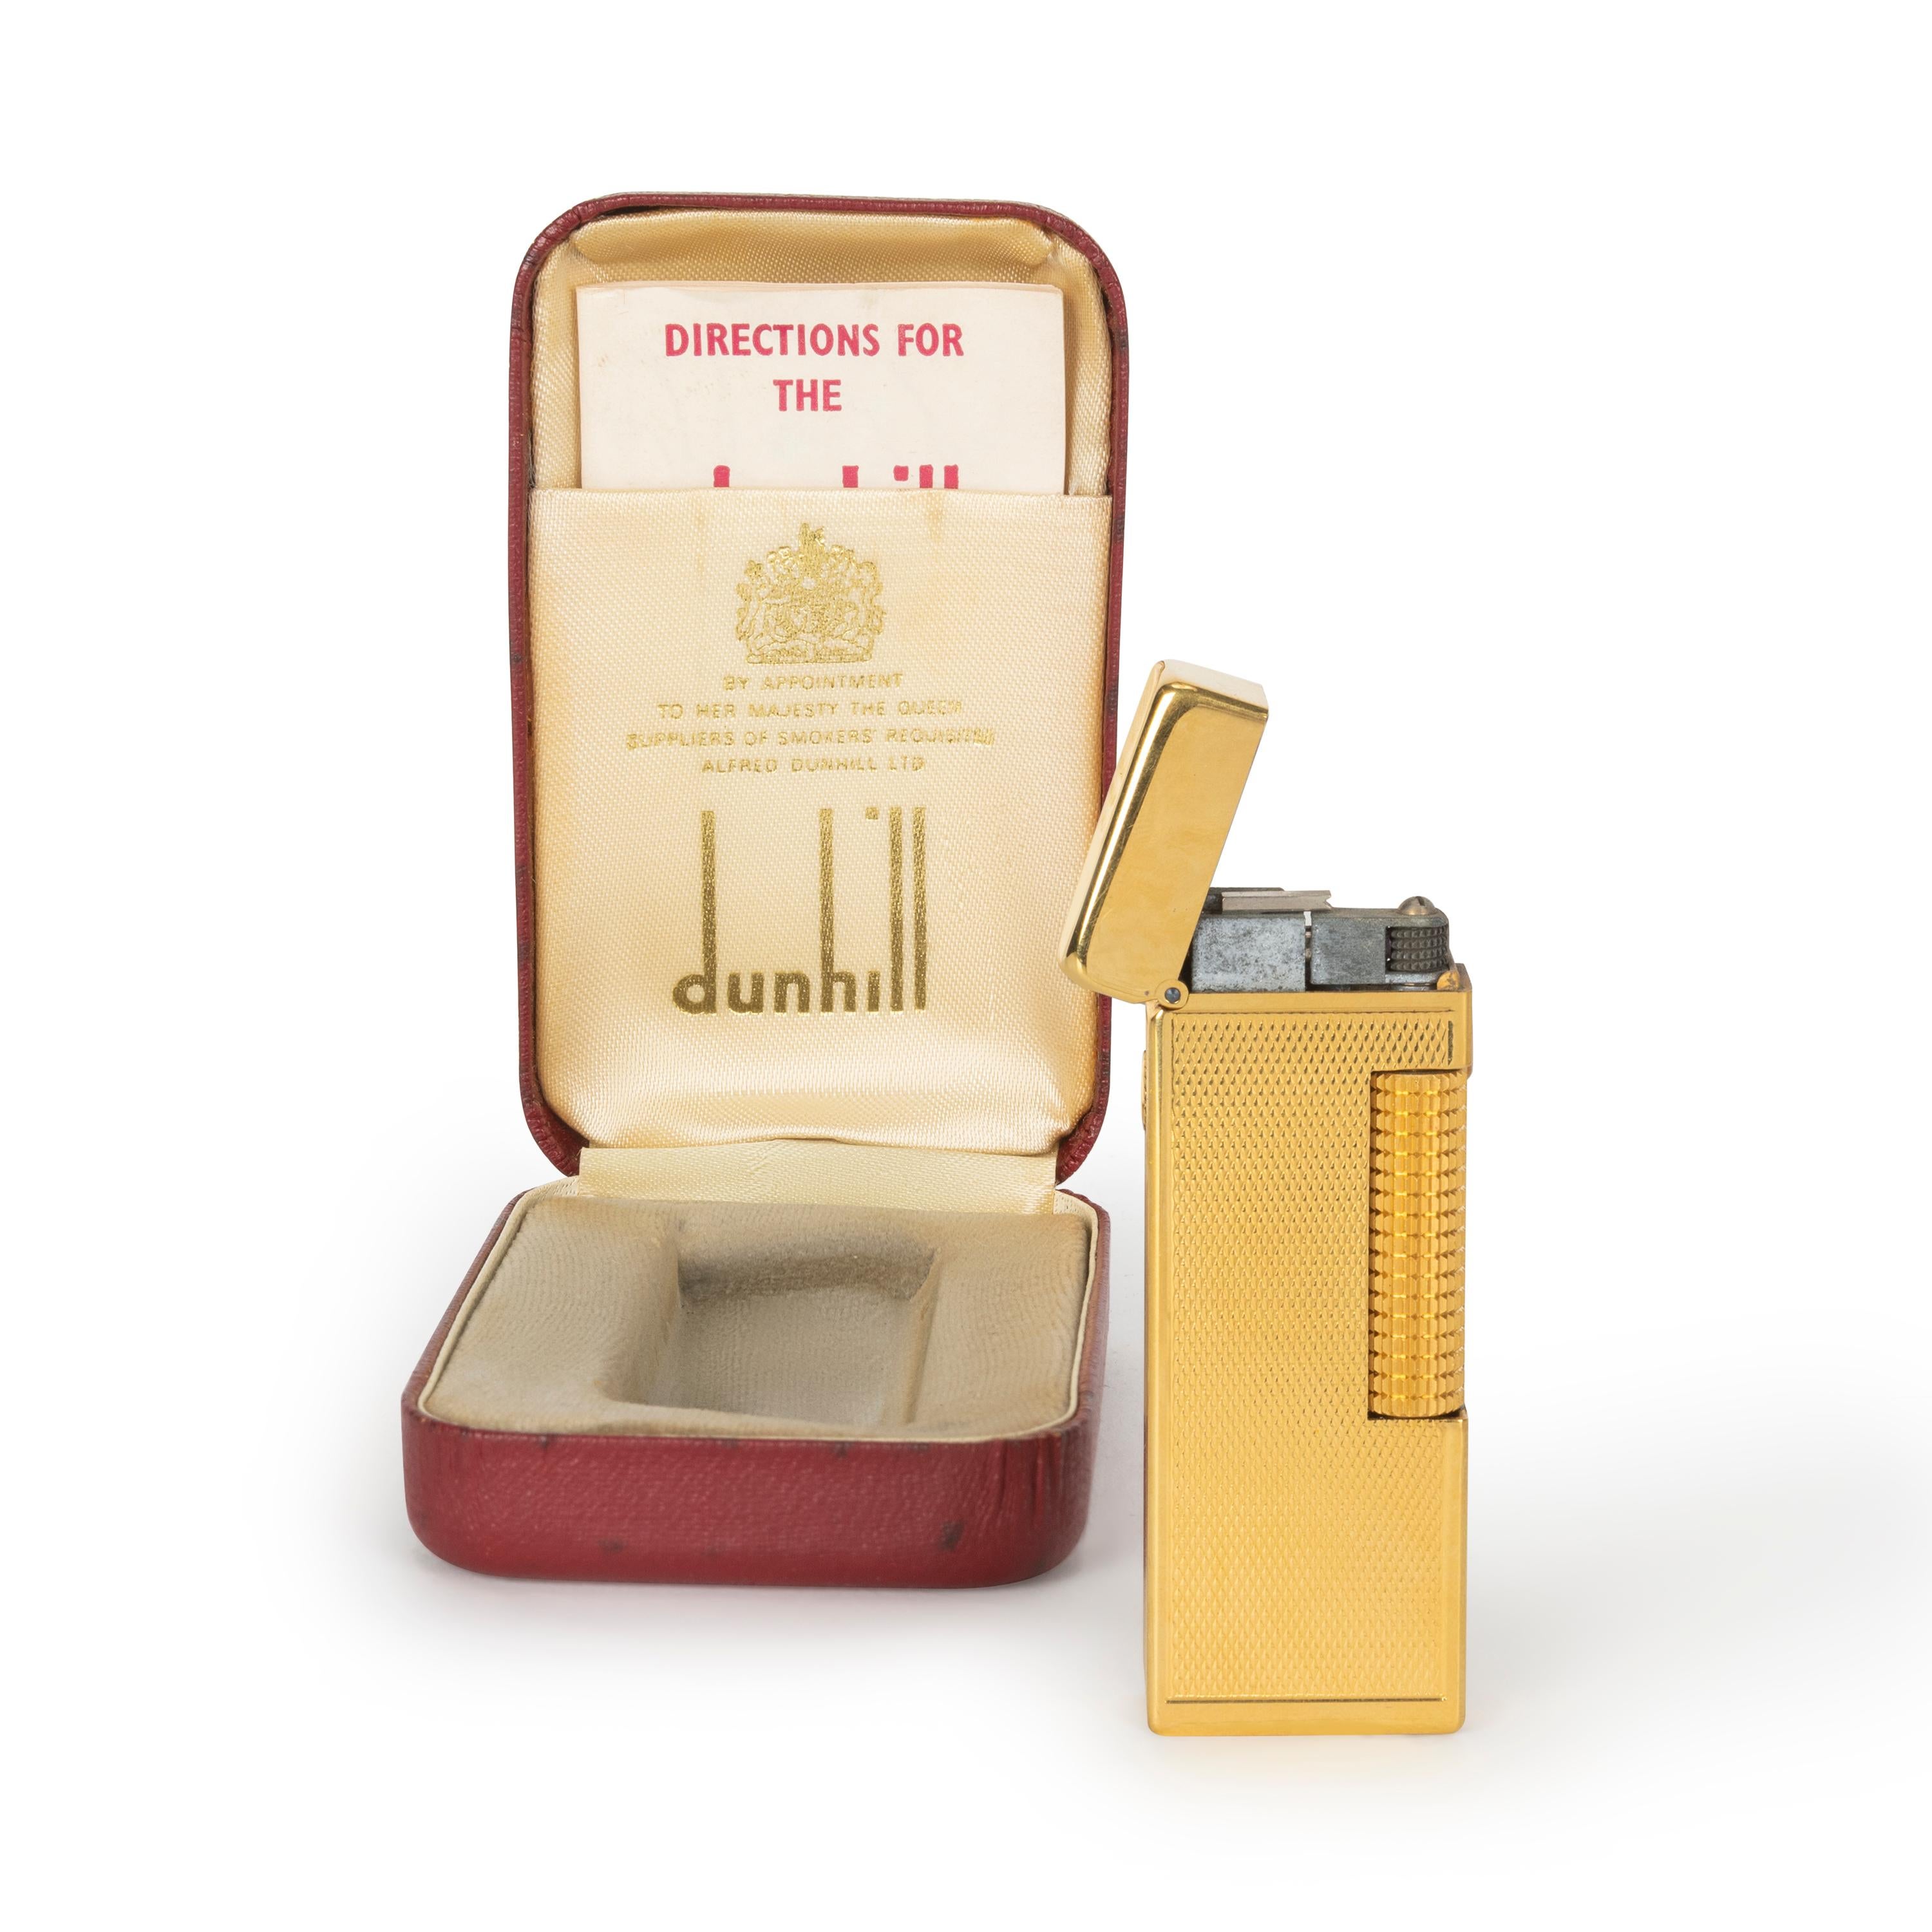 Vintage Dunhill Gold-Plated, Swiss Manufactured, Rollagas Lighter in mint condition. 
In original box. 
Brand: Dunhill.
Model: Rollagas.
Color: Gold.
Measures: 63cm x 23cm x 12cm.
.Weight: 71g.
Made in Switzerland.
Comes in original box. 